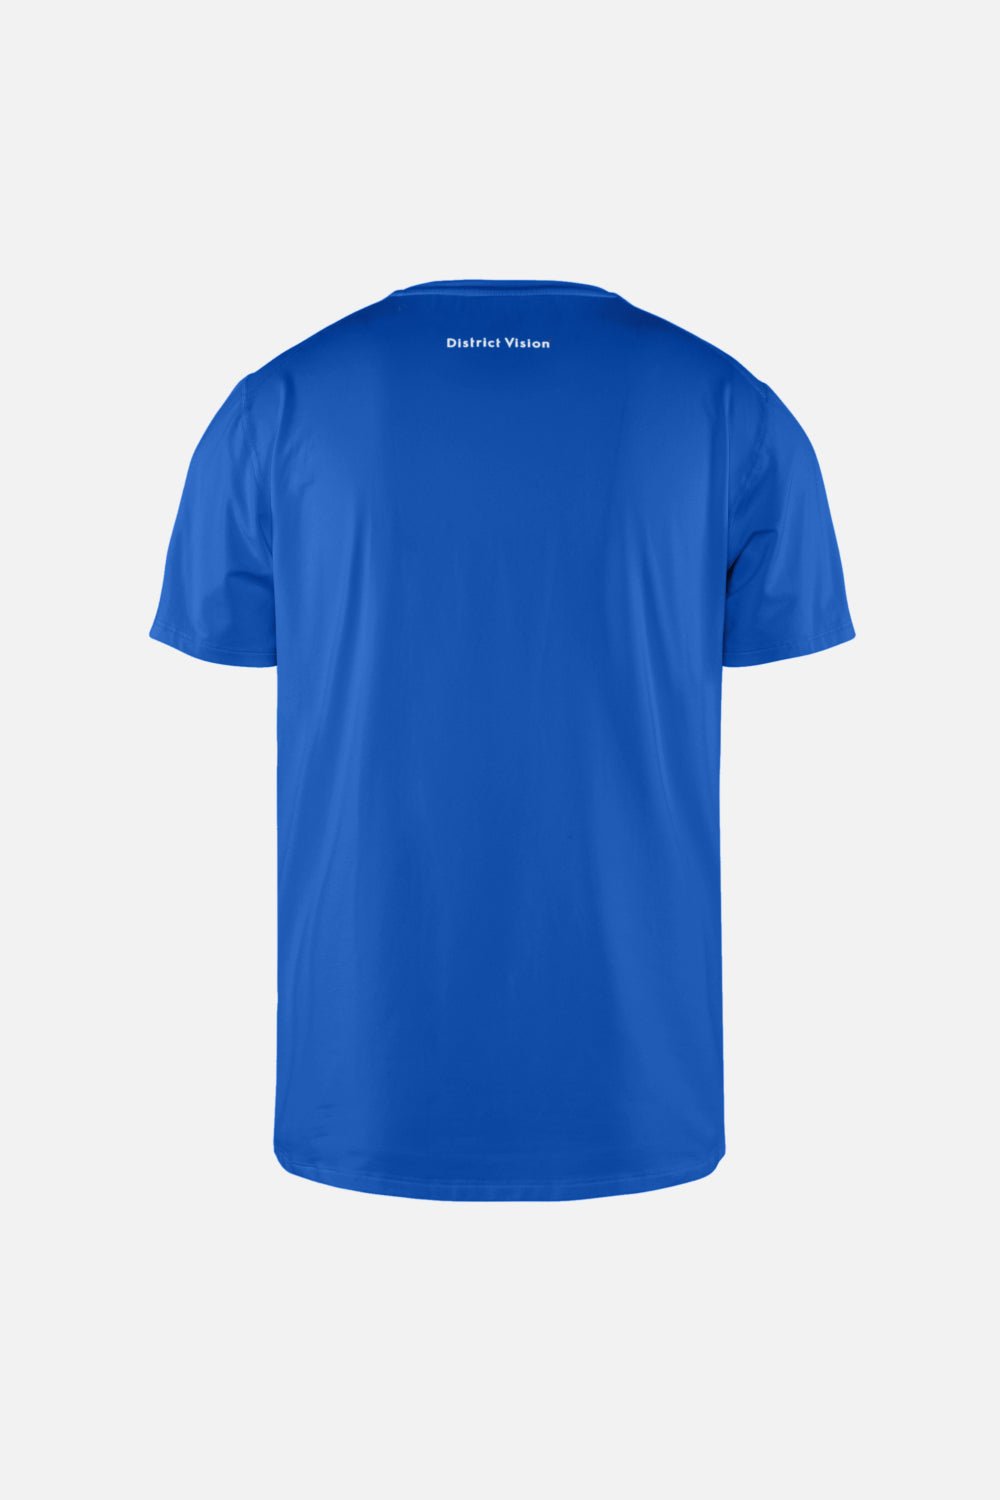 District Vision Lightweight Short Sleeve Tee - Surf Blue | Coffee Outdoors